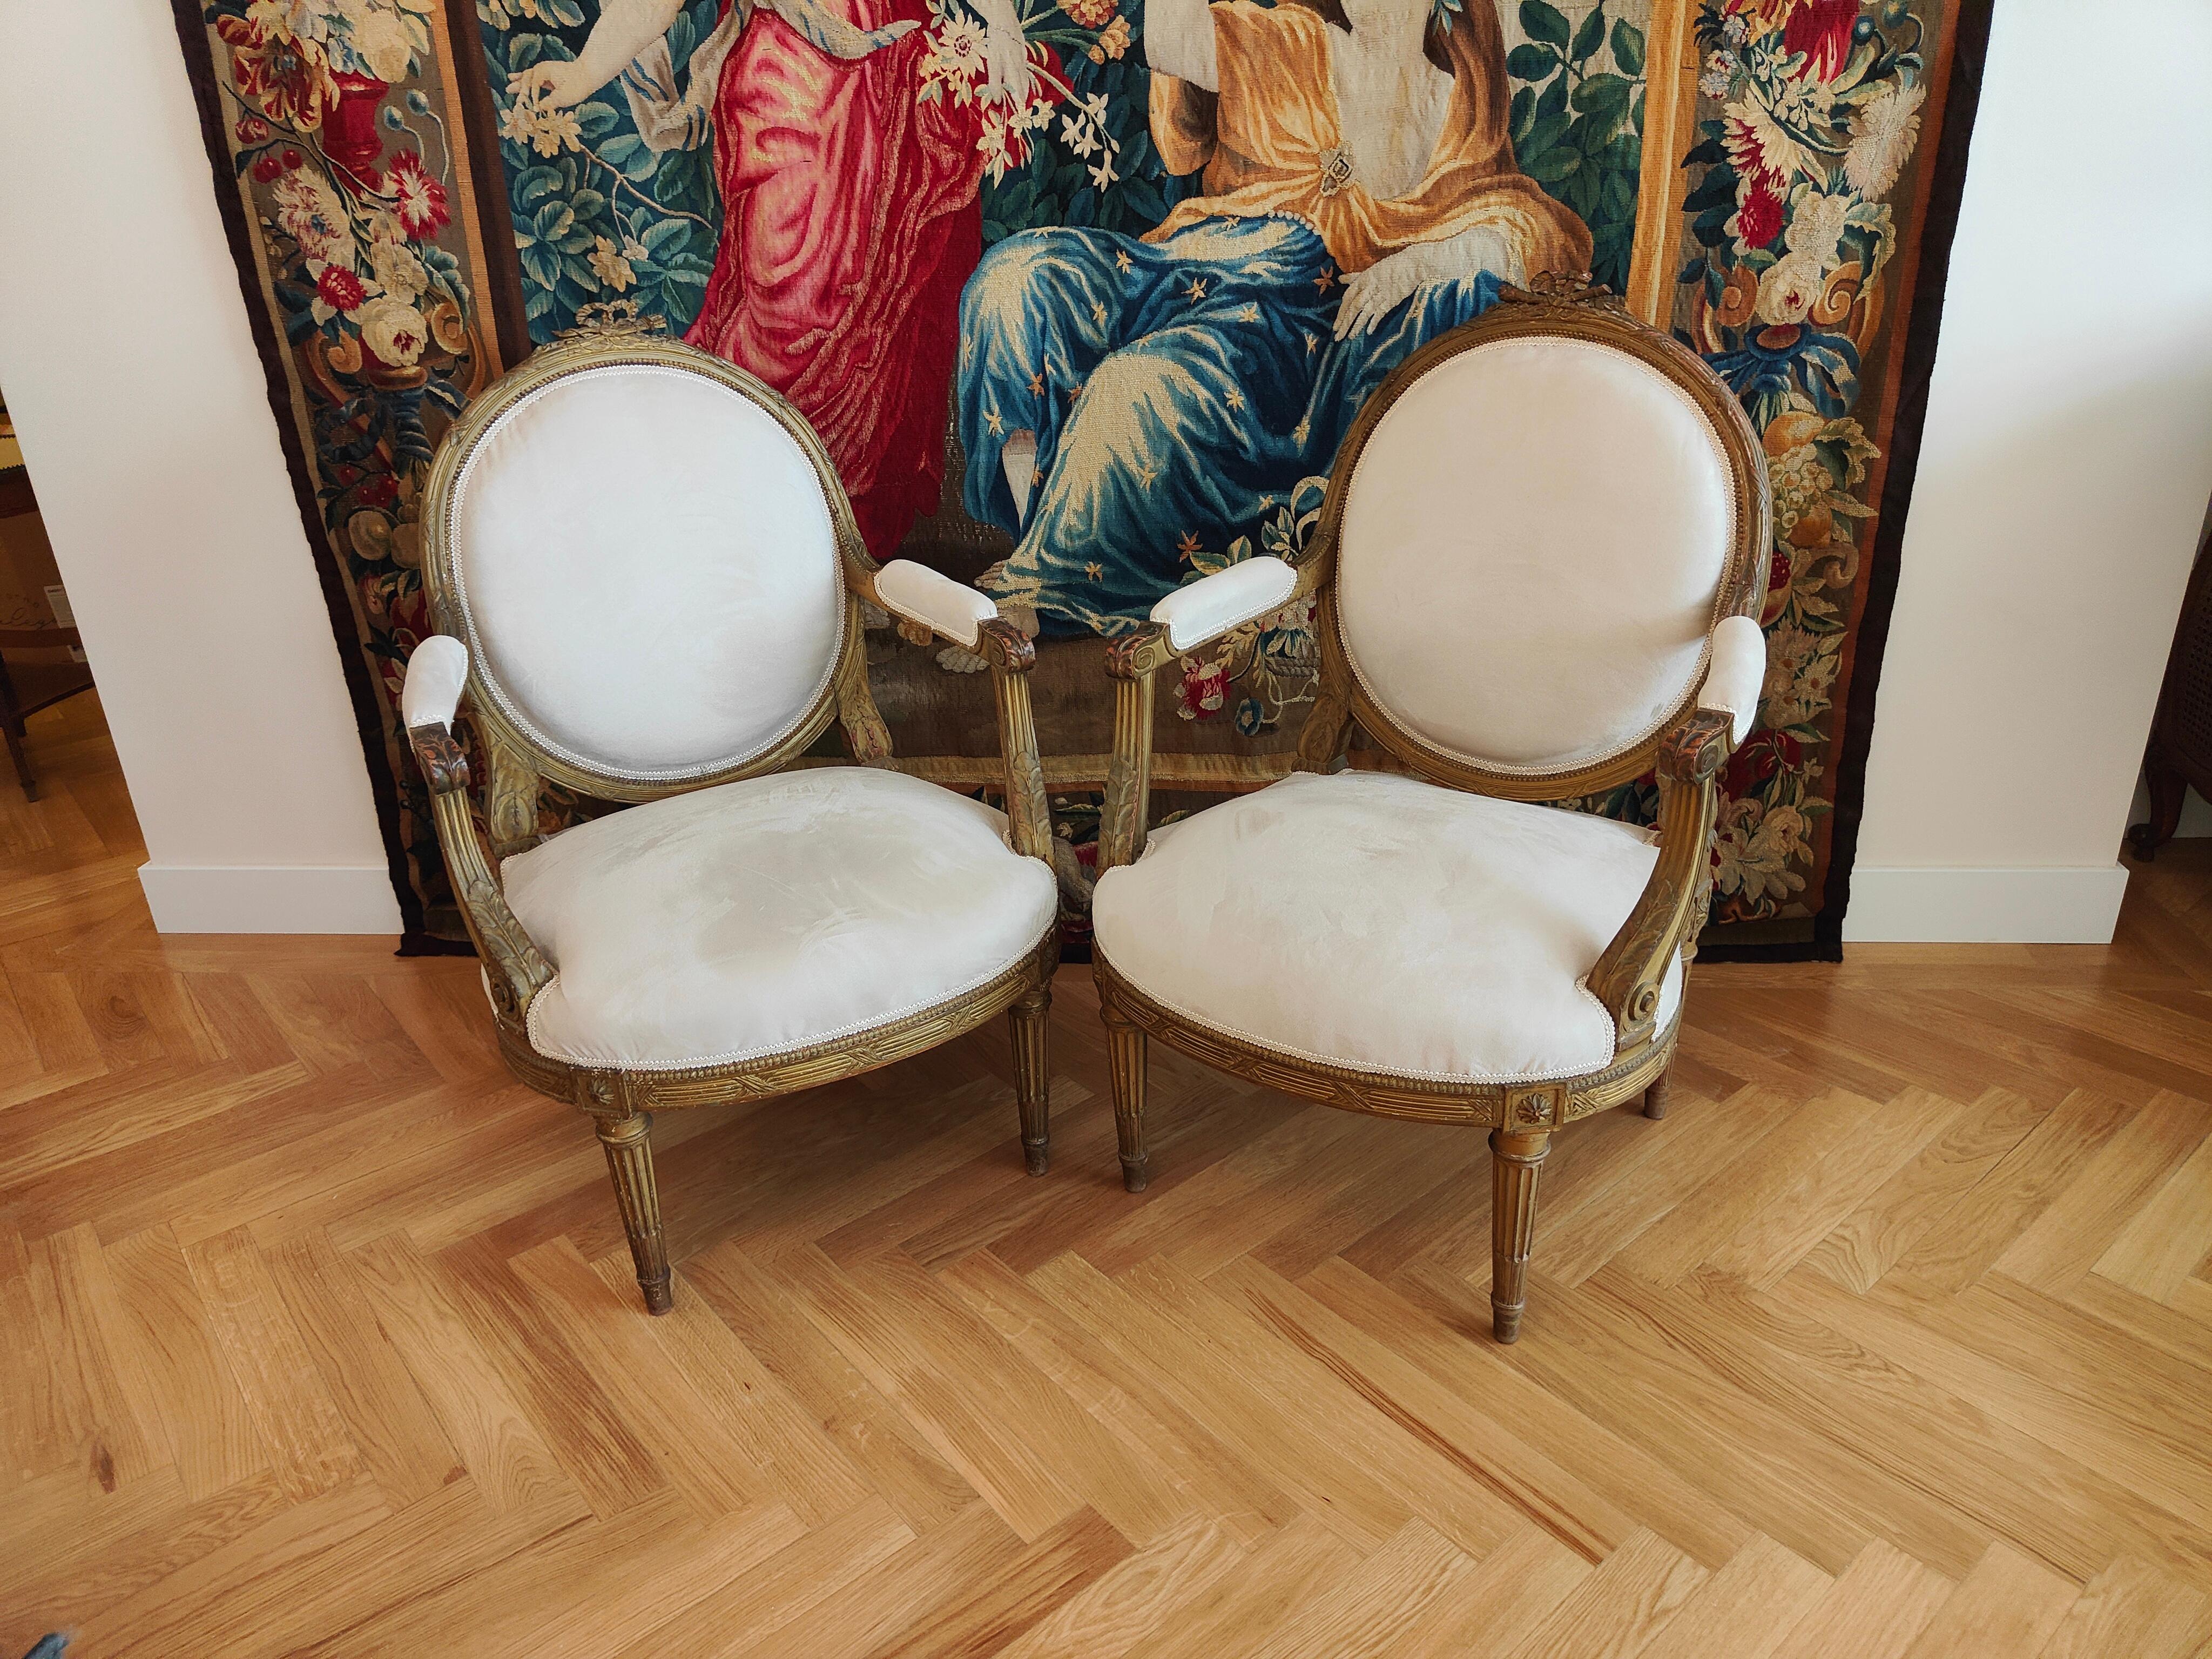 Pair Of French Chairs 18th Century
ELEGANT CHAIRS OF THE END OF THE EIGHTEENTH CENTURY, FRENCH, LATER UPHOLSTERED IN WHITE FABRIC. MEASURES: 100X85X60